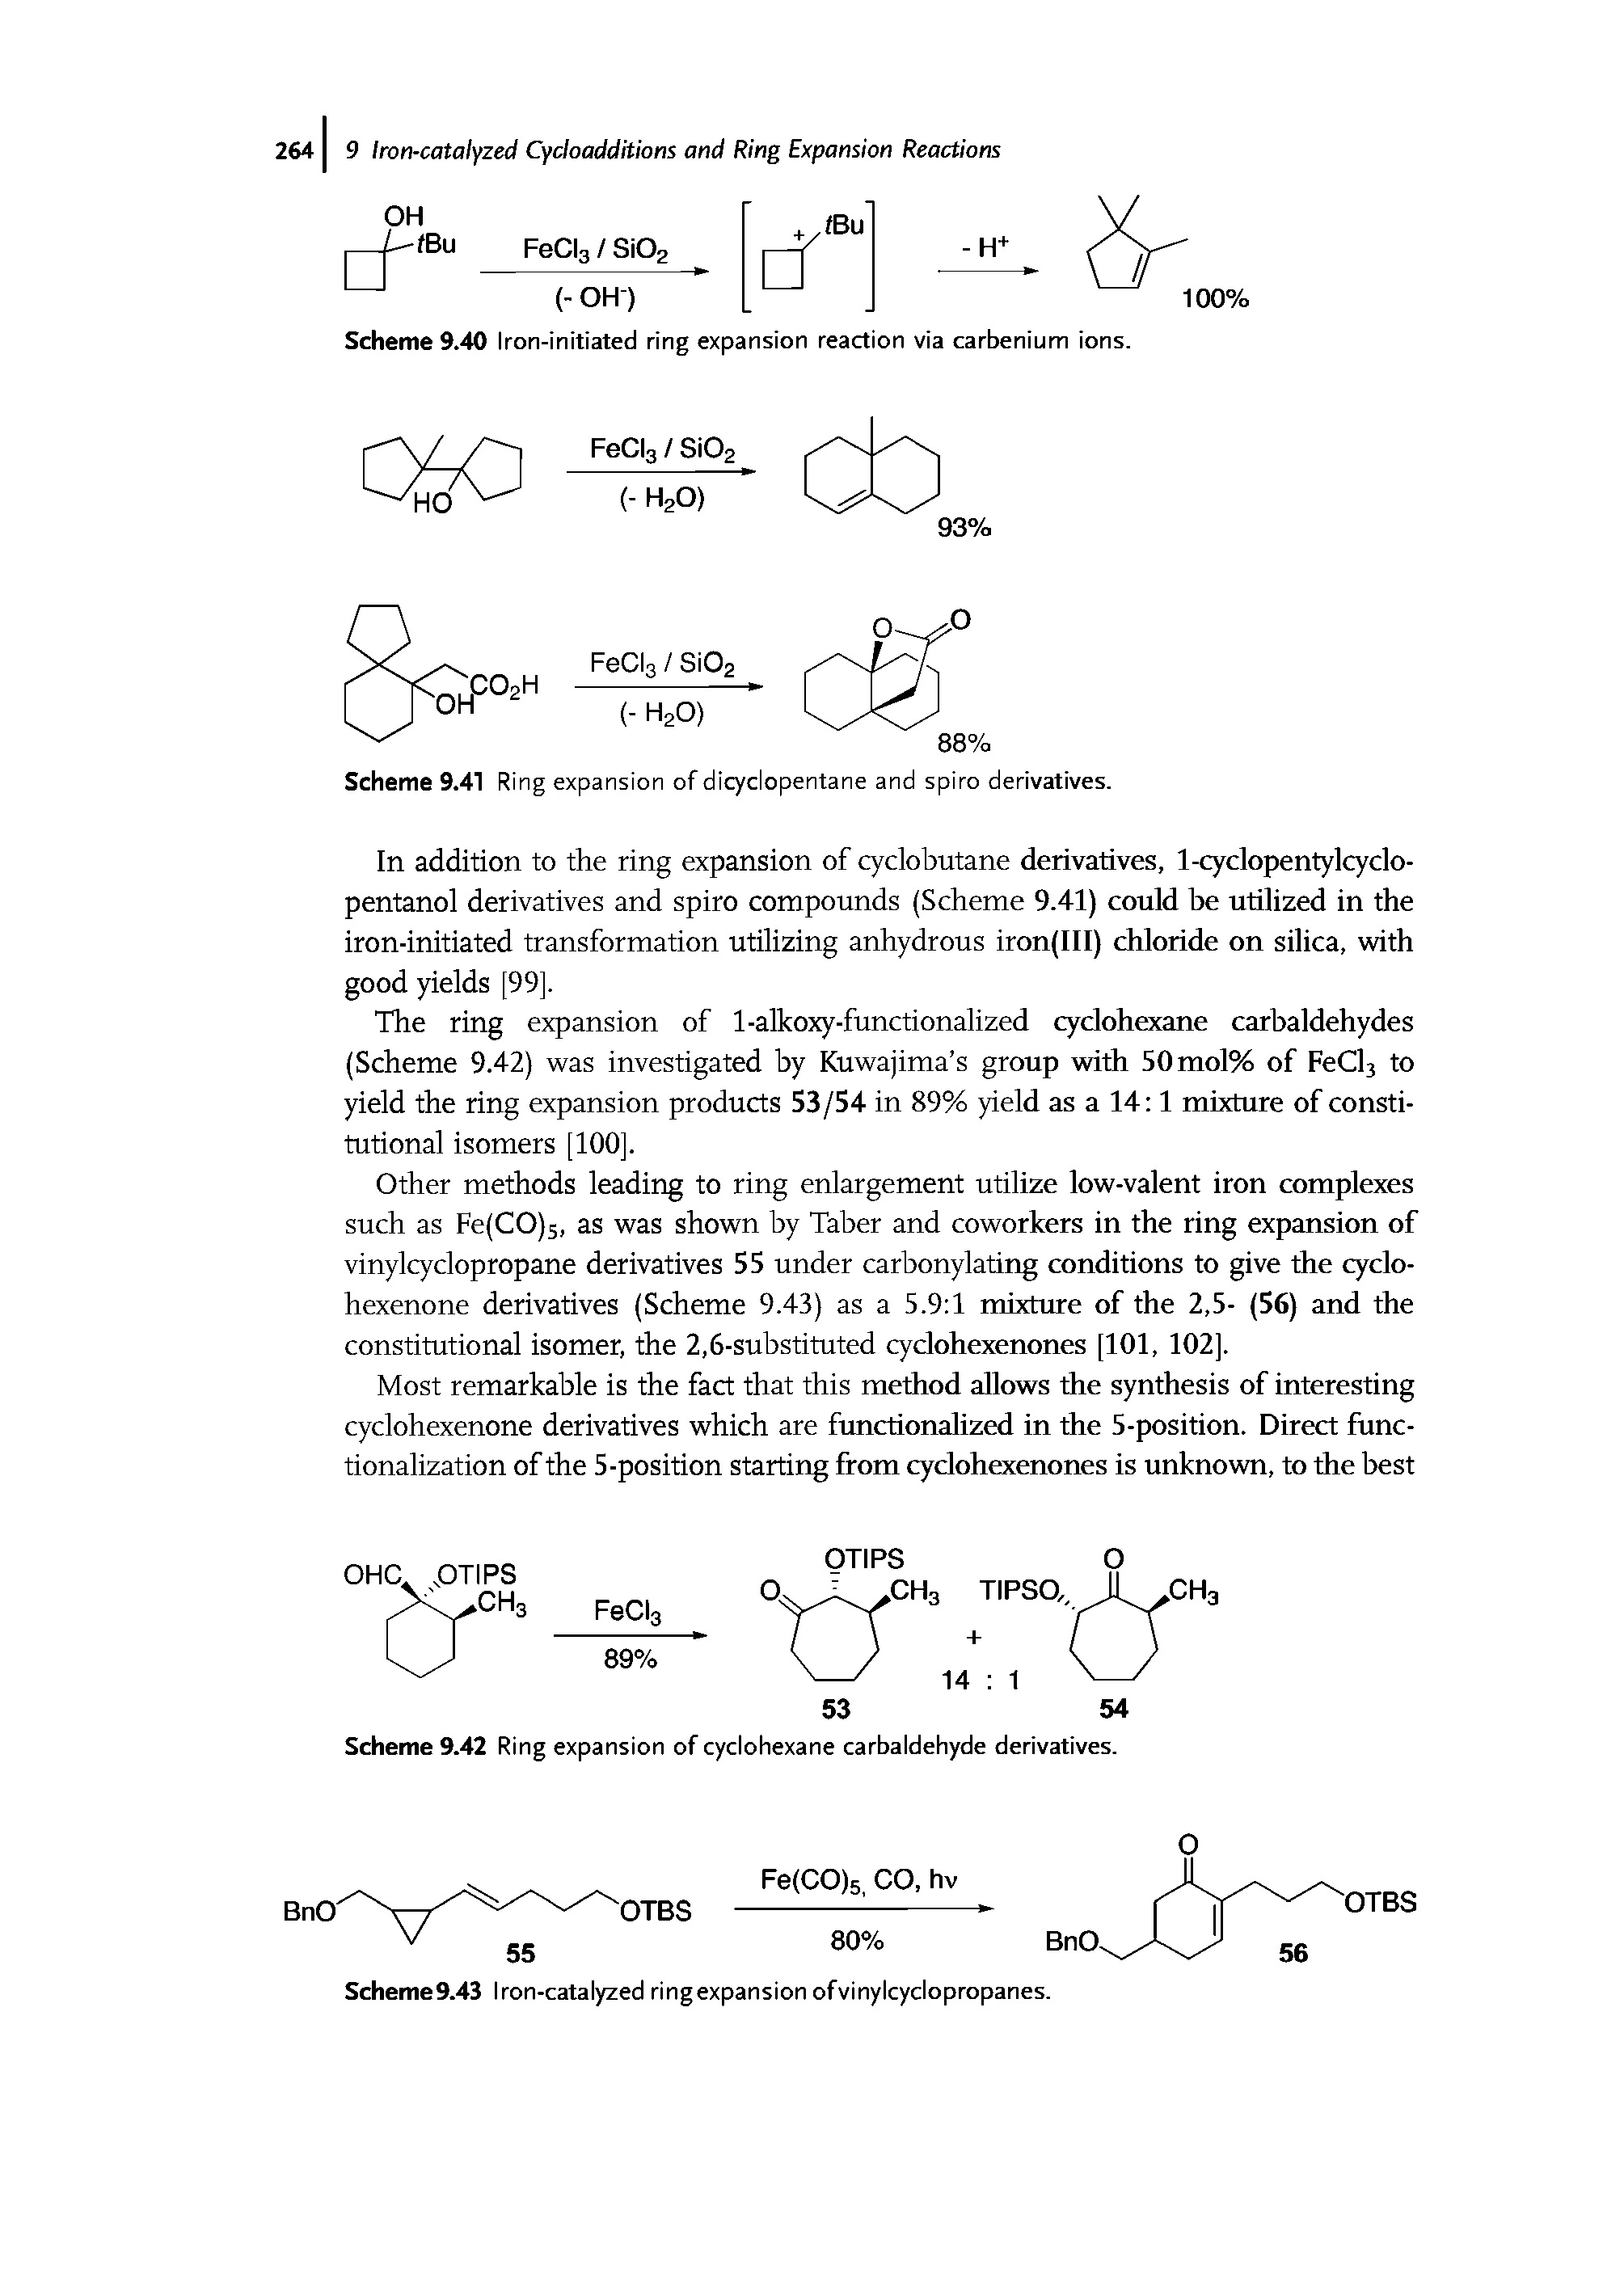 Scheme 9.40 Iron-initiated ring expansion reaction via carbenium ions.